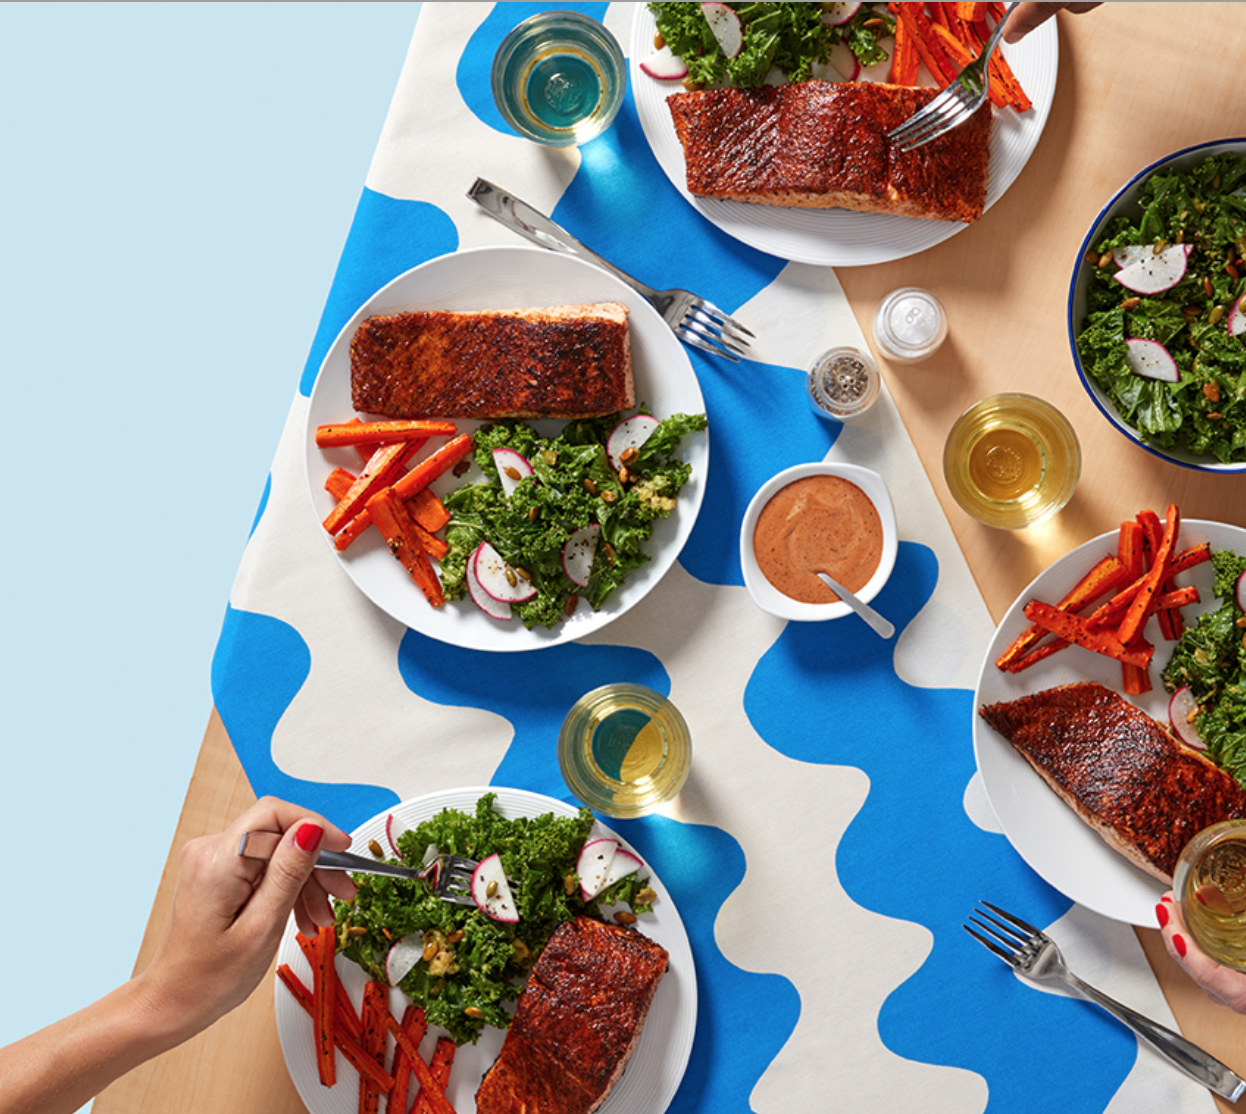 Blue Apron Cyber Monday Deal – Save $84 Off Your First Four Weeks!